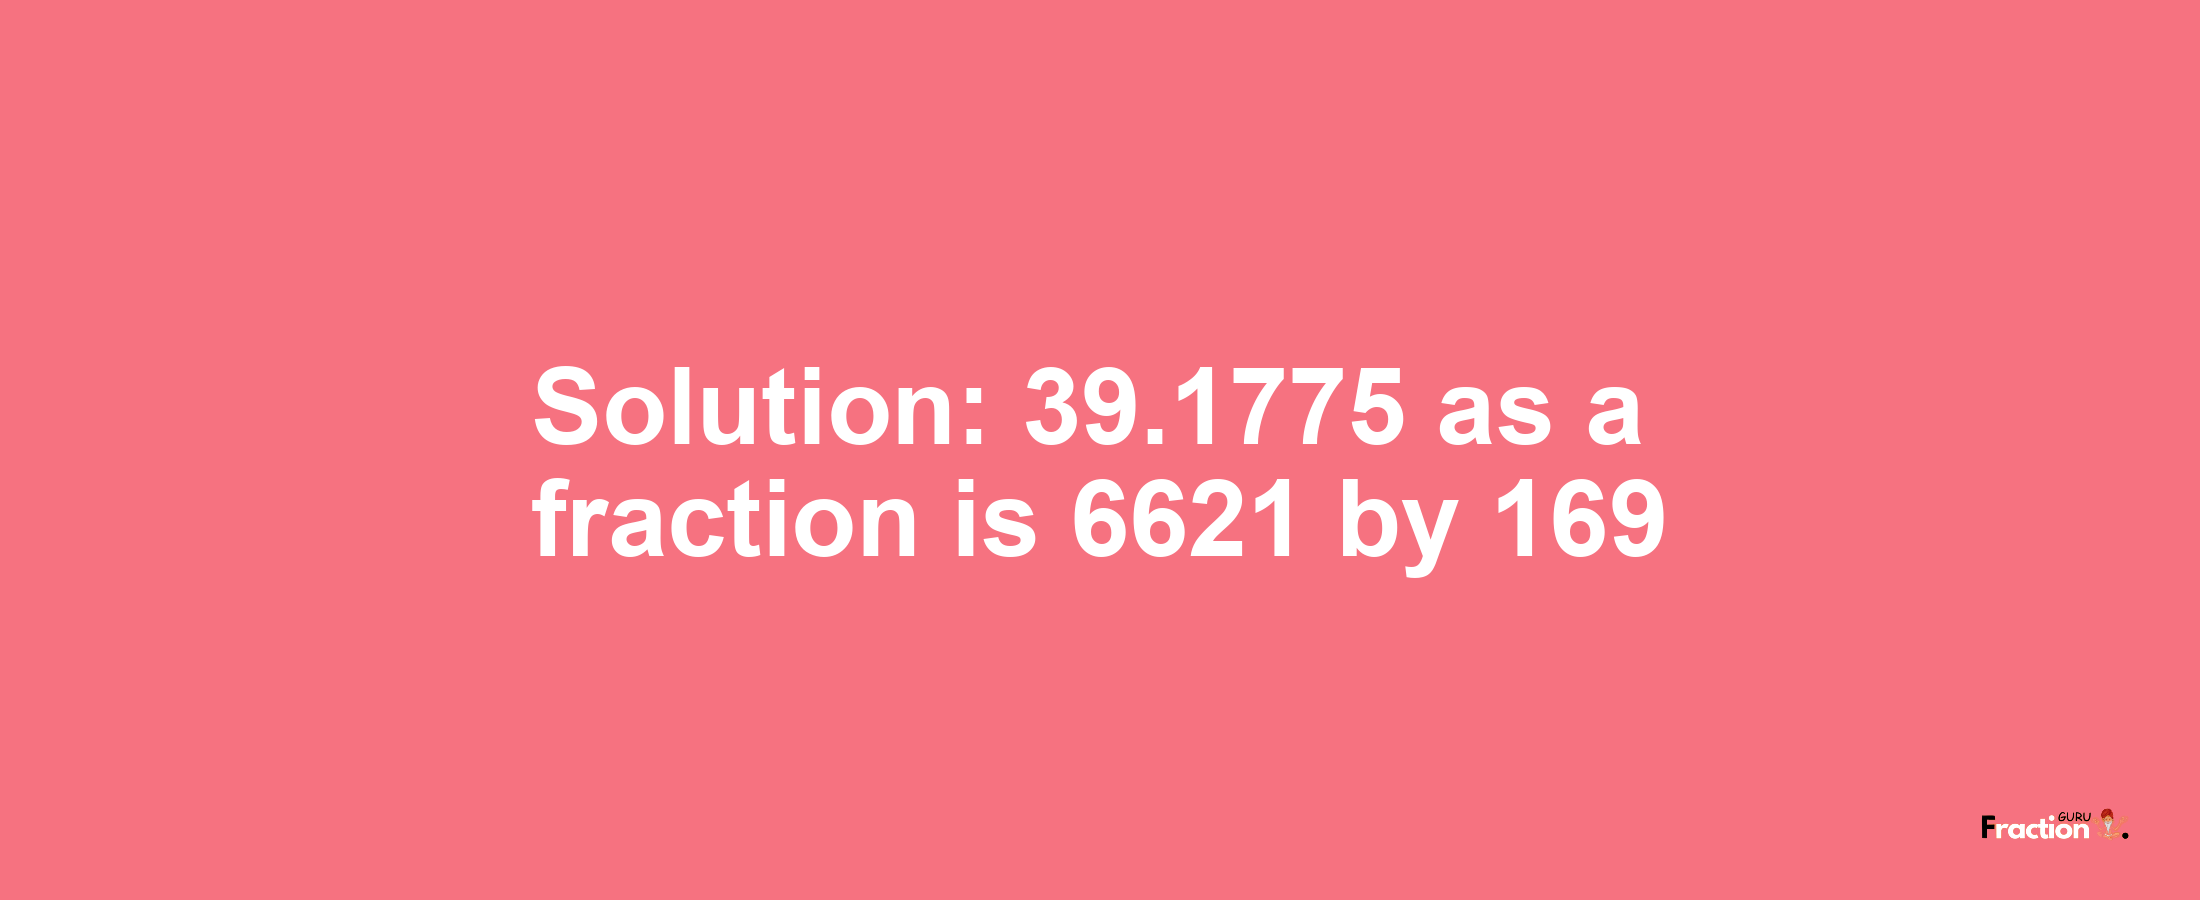 Solution:39.1775 as a fraction is 6621/169